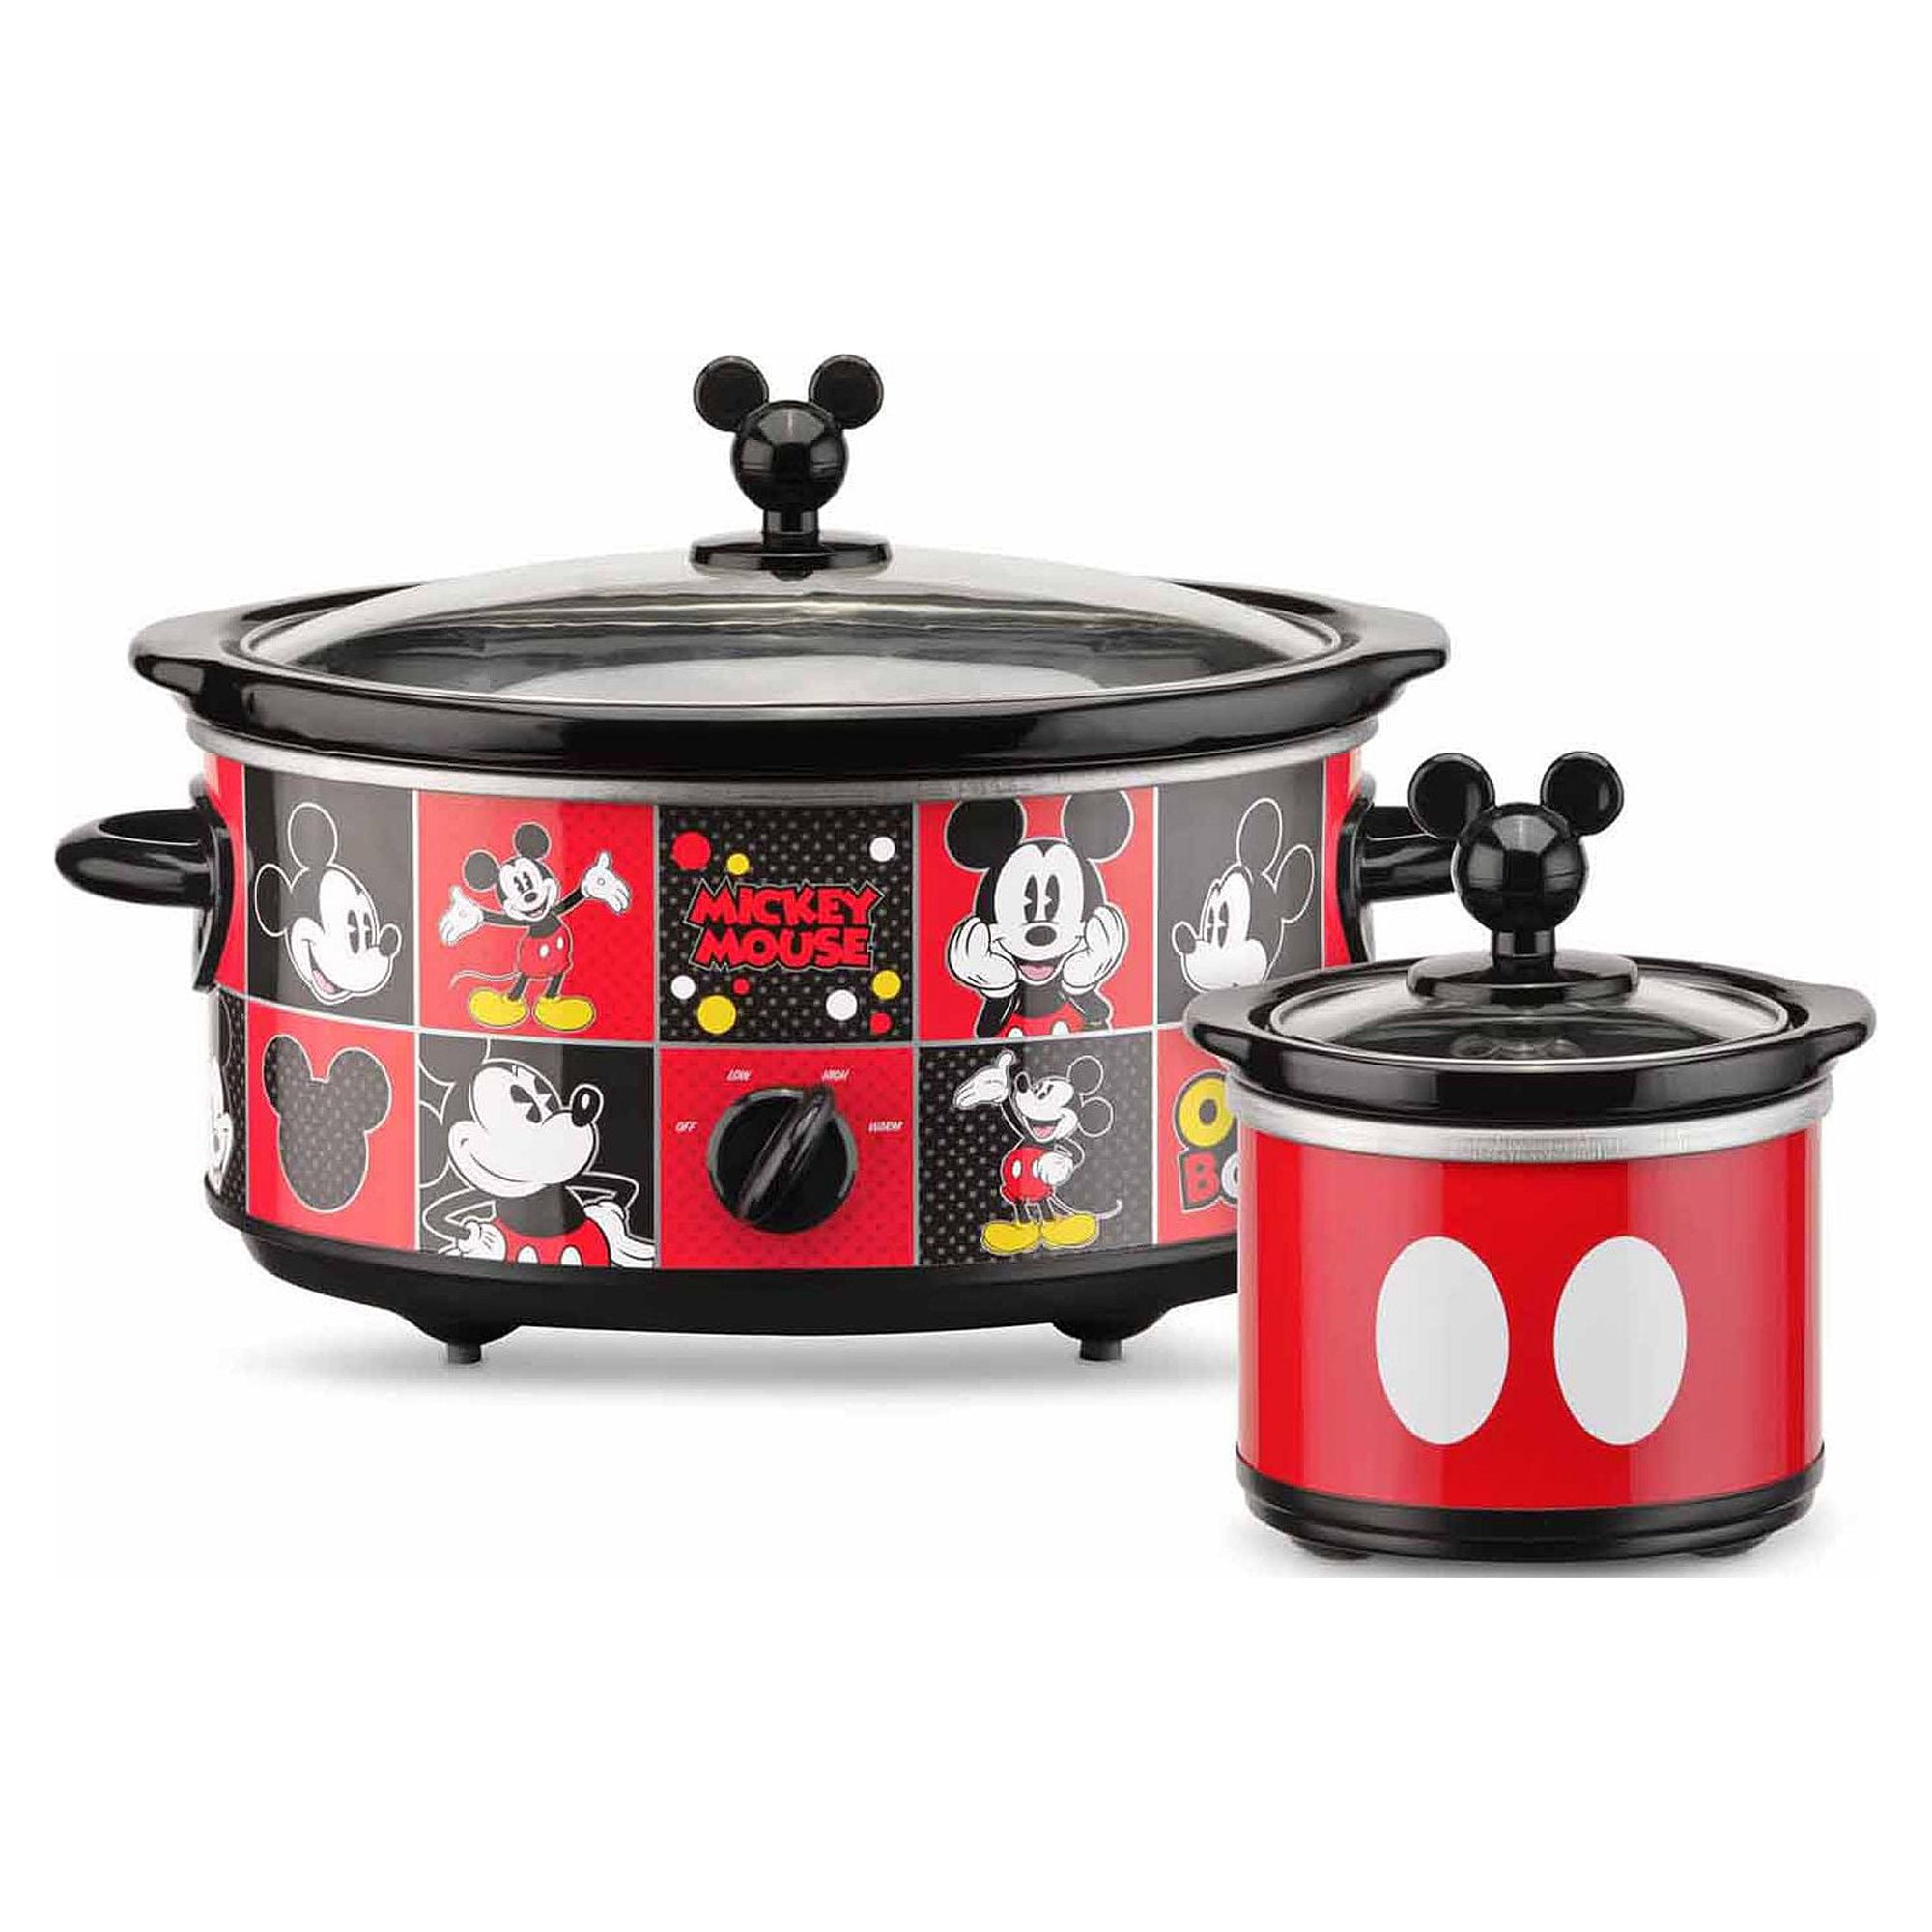 Disney DCM-502 Mickey Mouse Oval Slow Cooker with 20-Ounce Dipper, 5-Quart, Red/Black - image 3 of 5